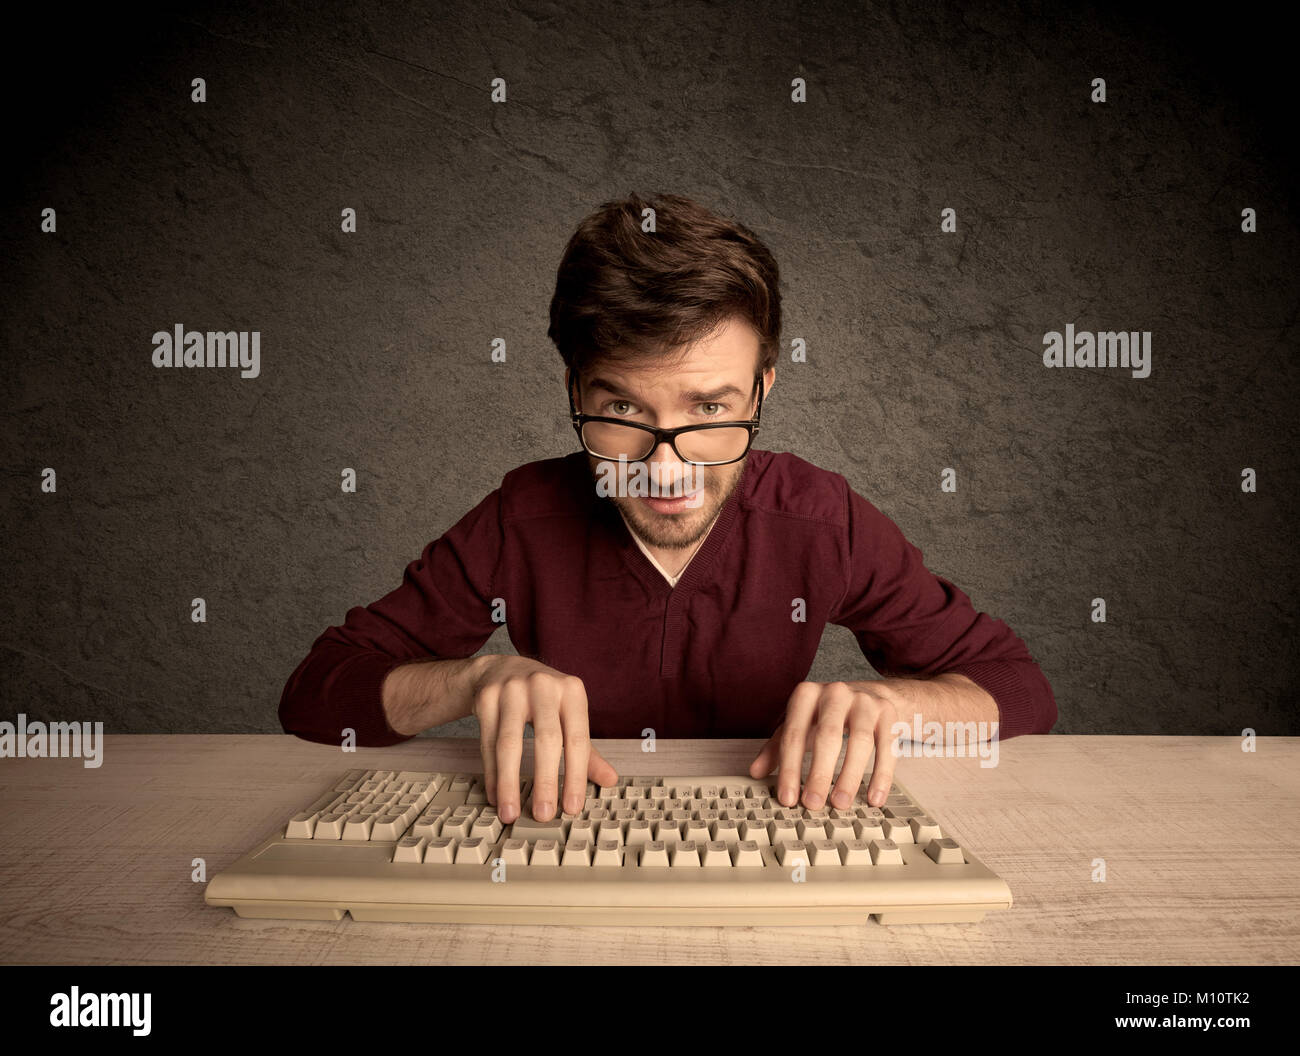 A young hacker with glasses dressed in casual clothes sitting at a desk and working on a computer keyboard in front of black clear concrete wall backg Stock Photo